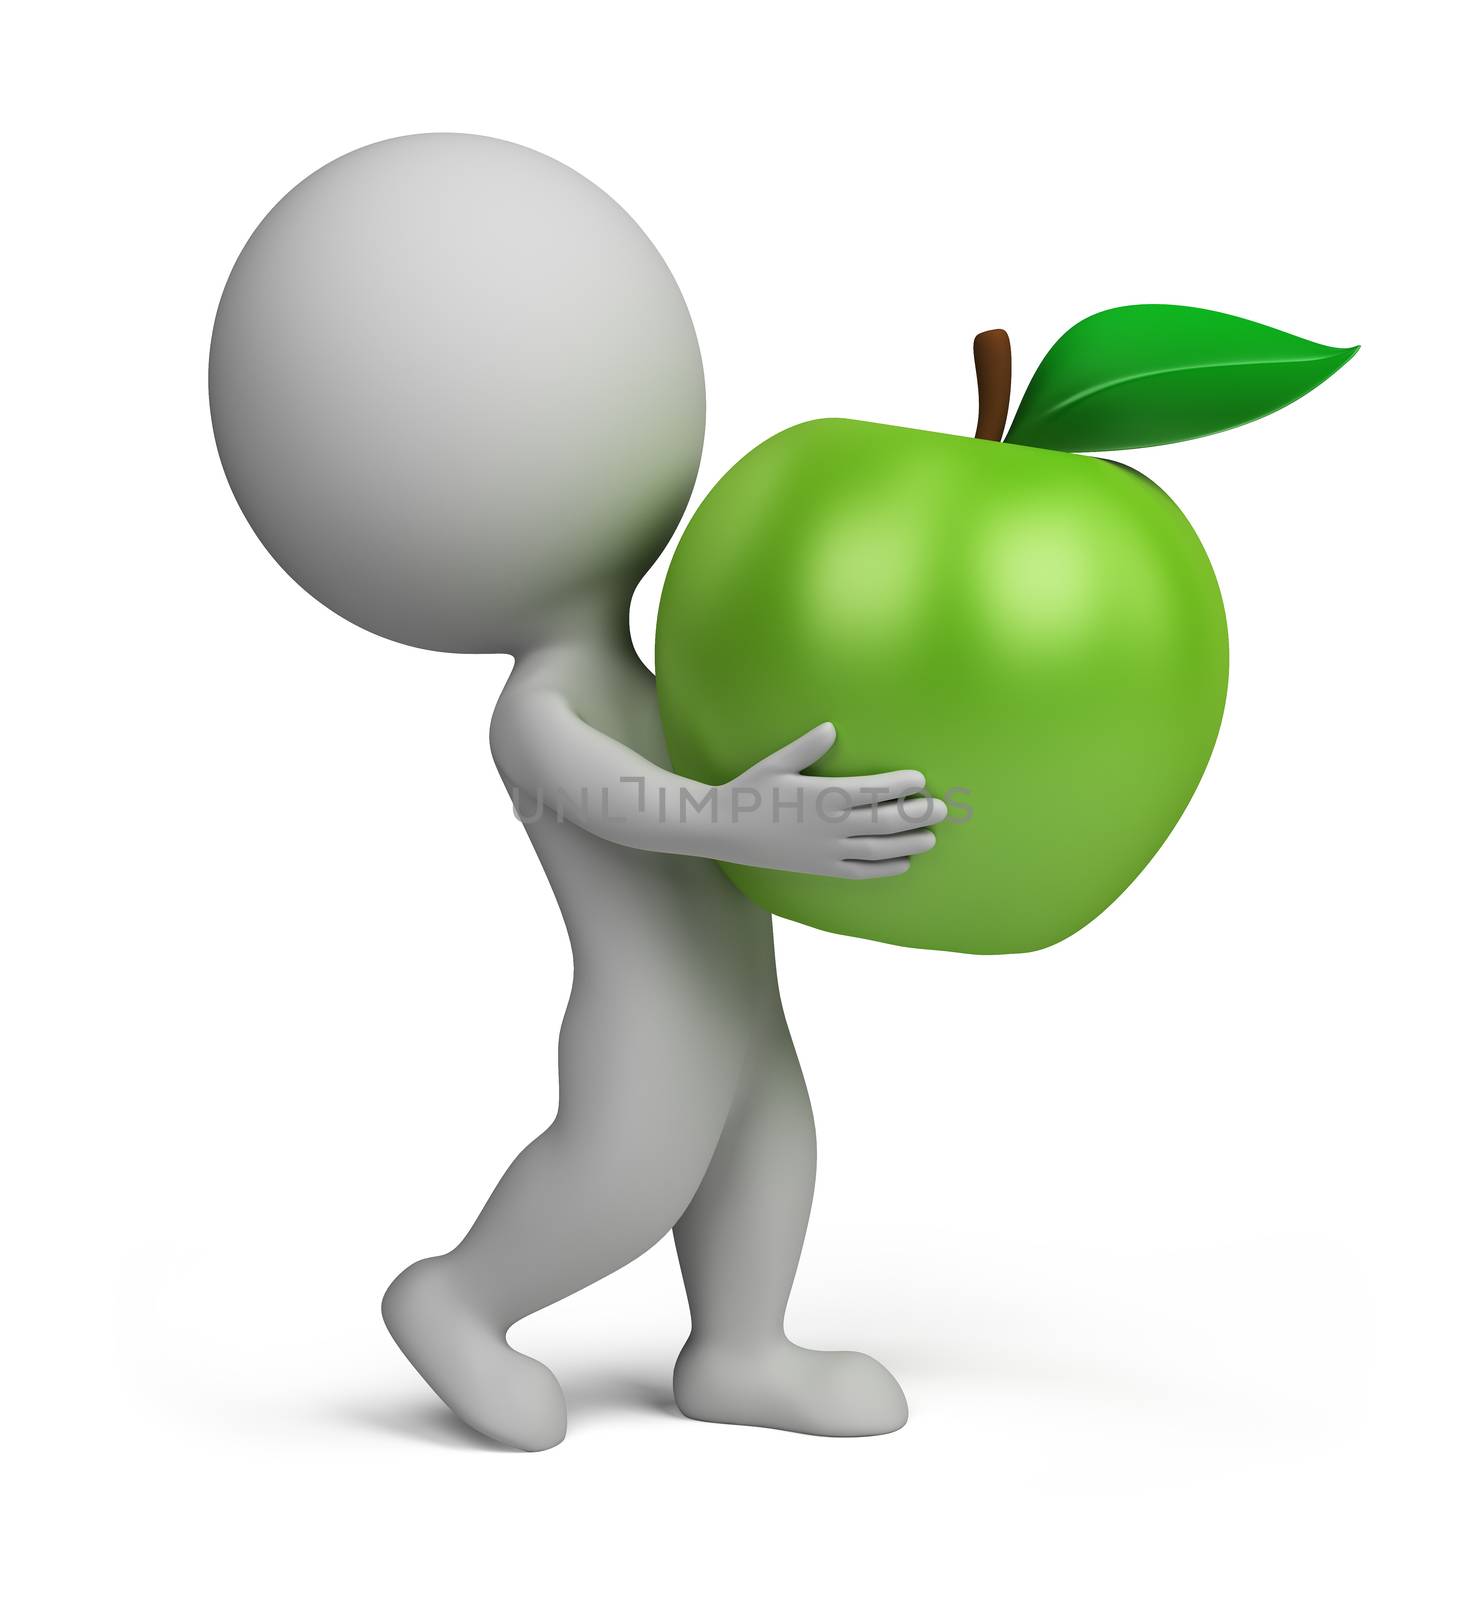 3d small person carrying a green apple. 3d image. Isolated white background.